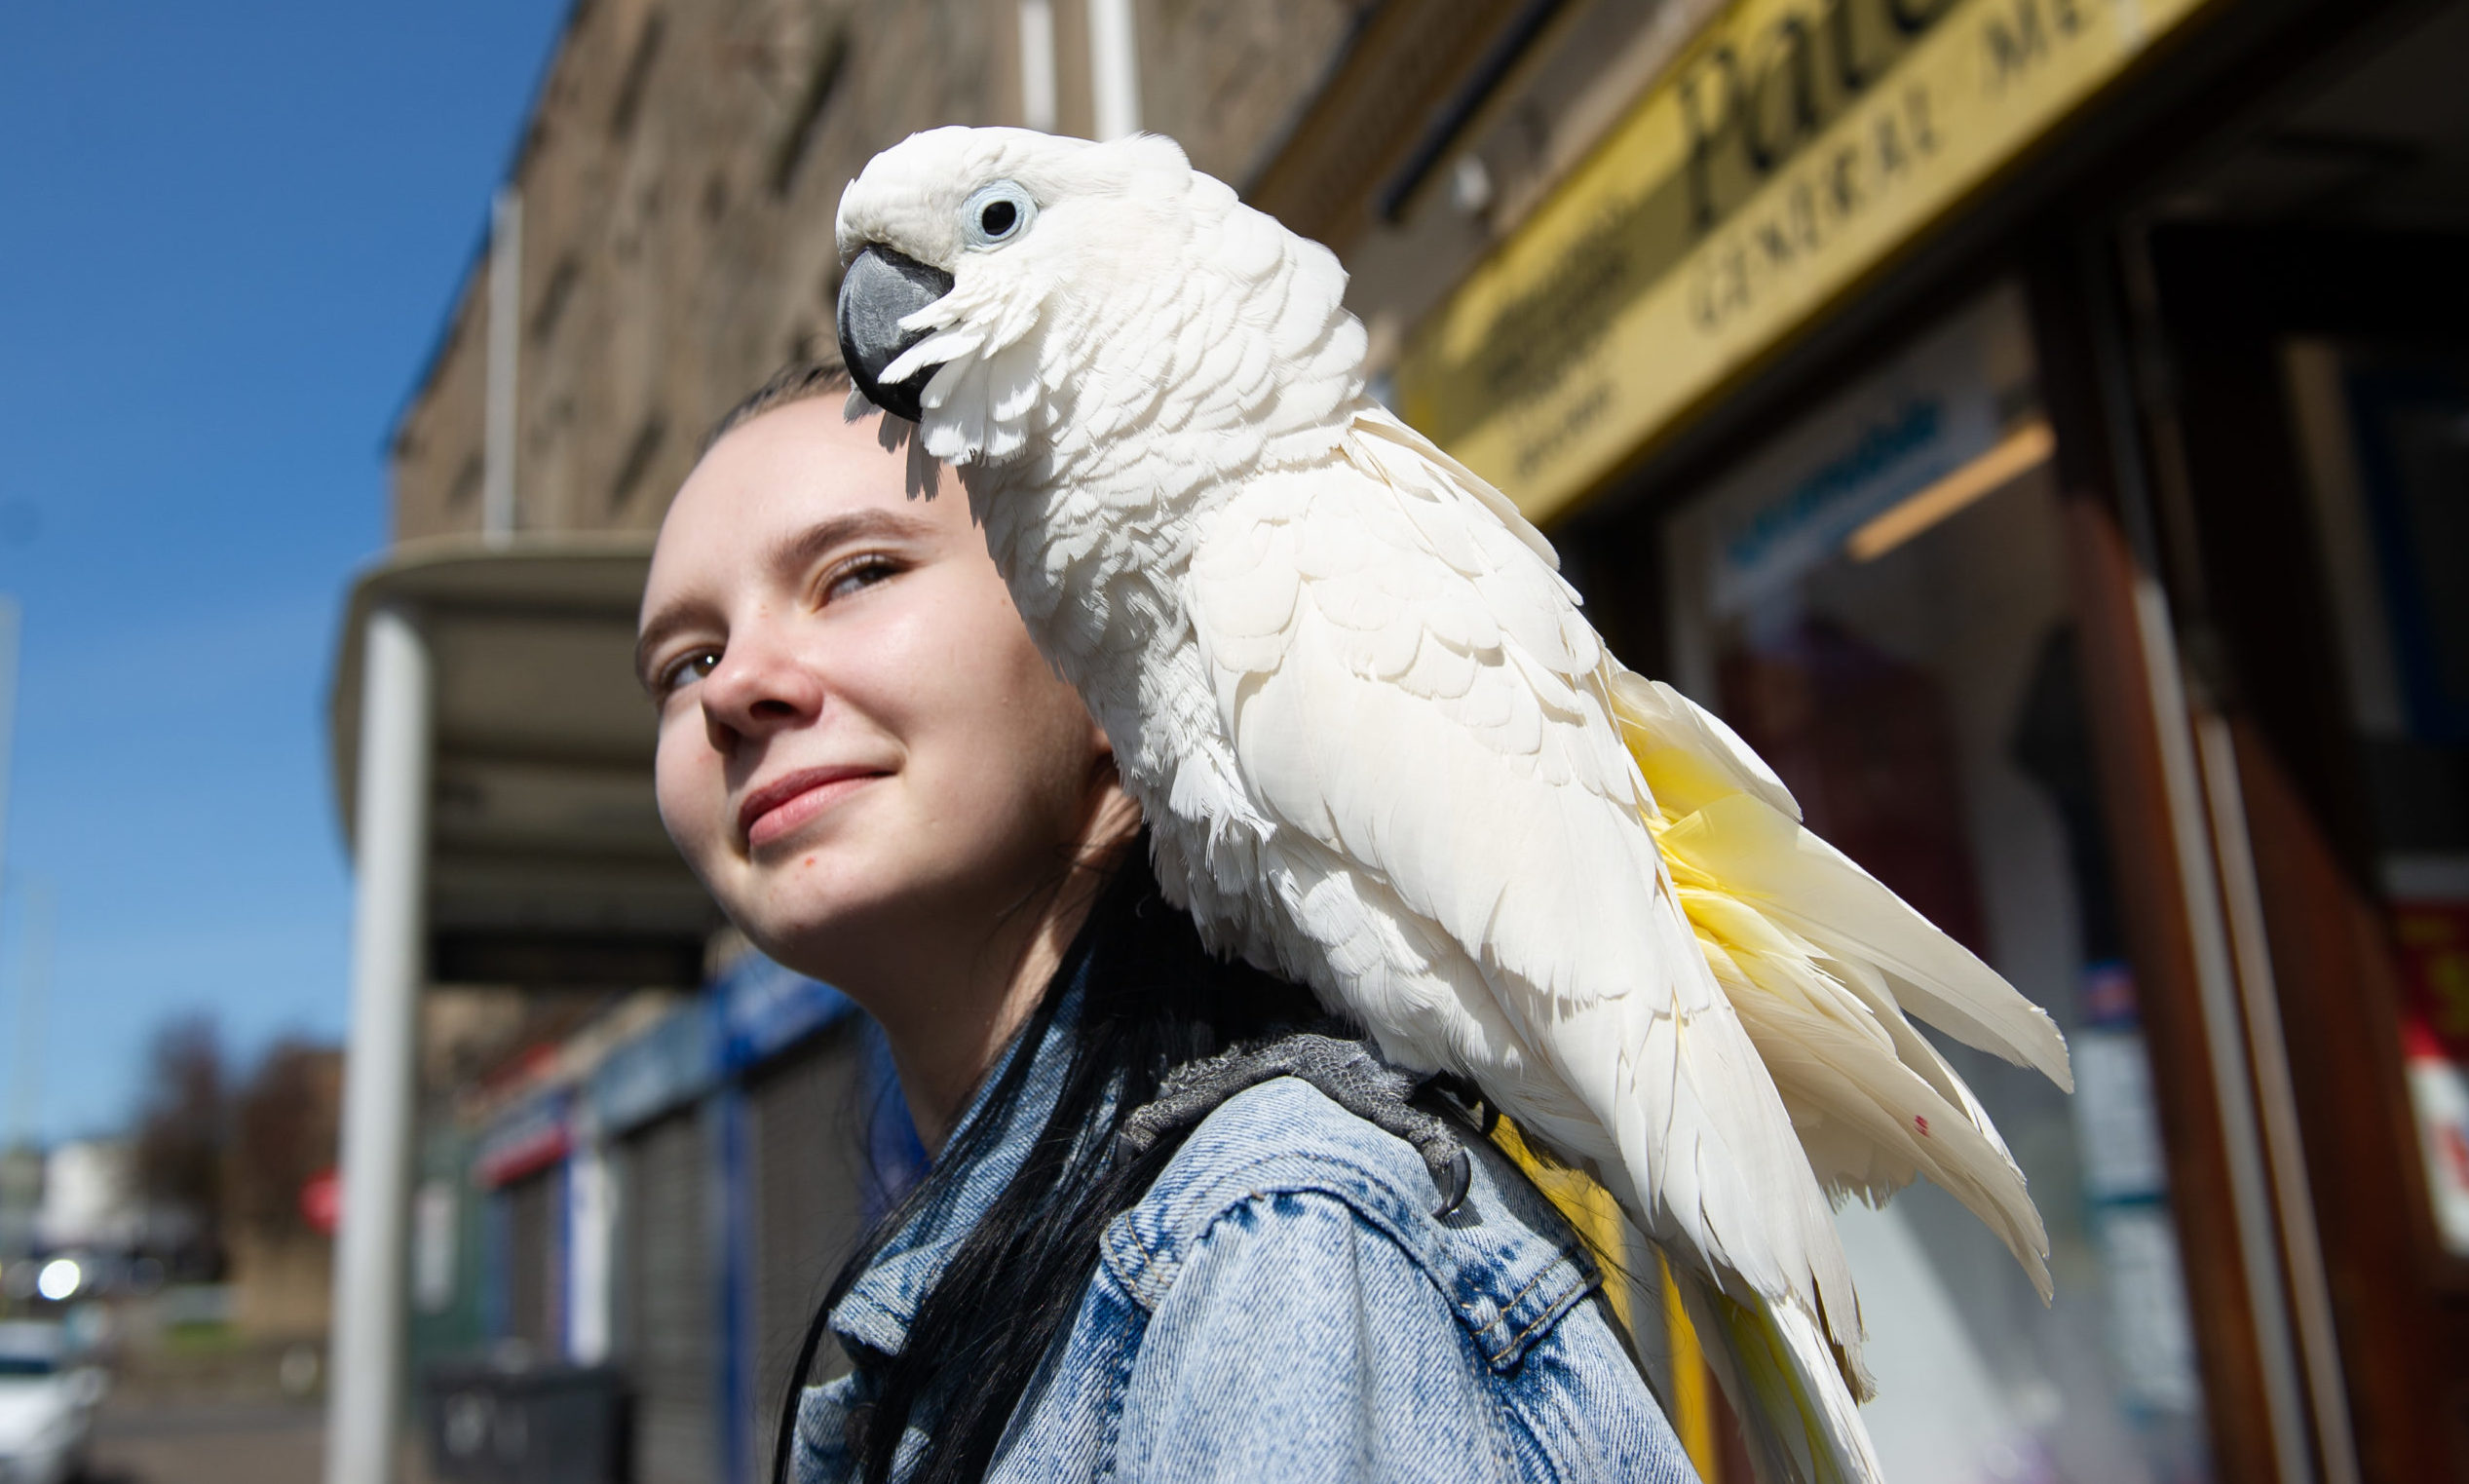 Tayside Cleaning Solutions, Terry O'Shea brings his parrot 'Shortie' to work every day - Nicole Hamilton meets Shortie.